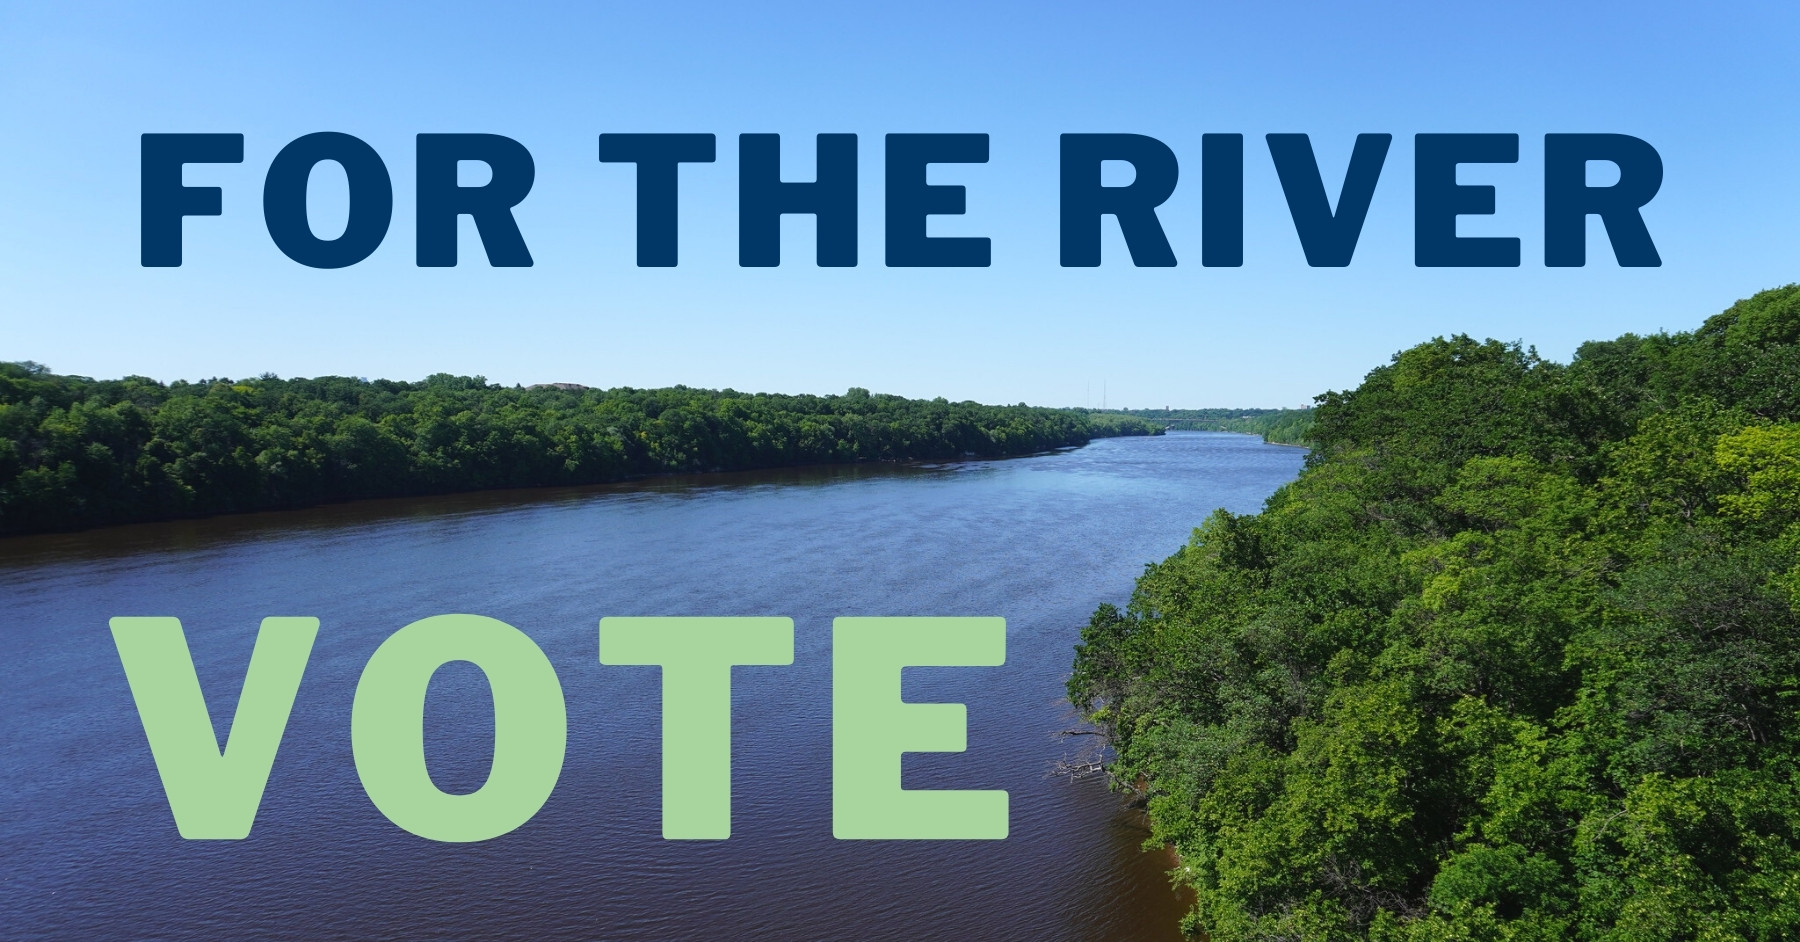 An aerial photo of the Mississippi River. Text along the top says "For the river." Text in the bottom lift says "Vote."